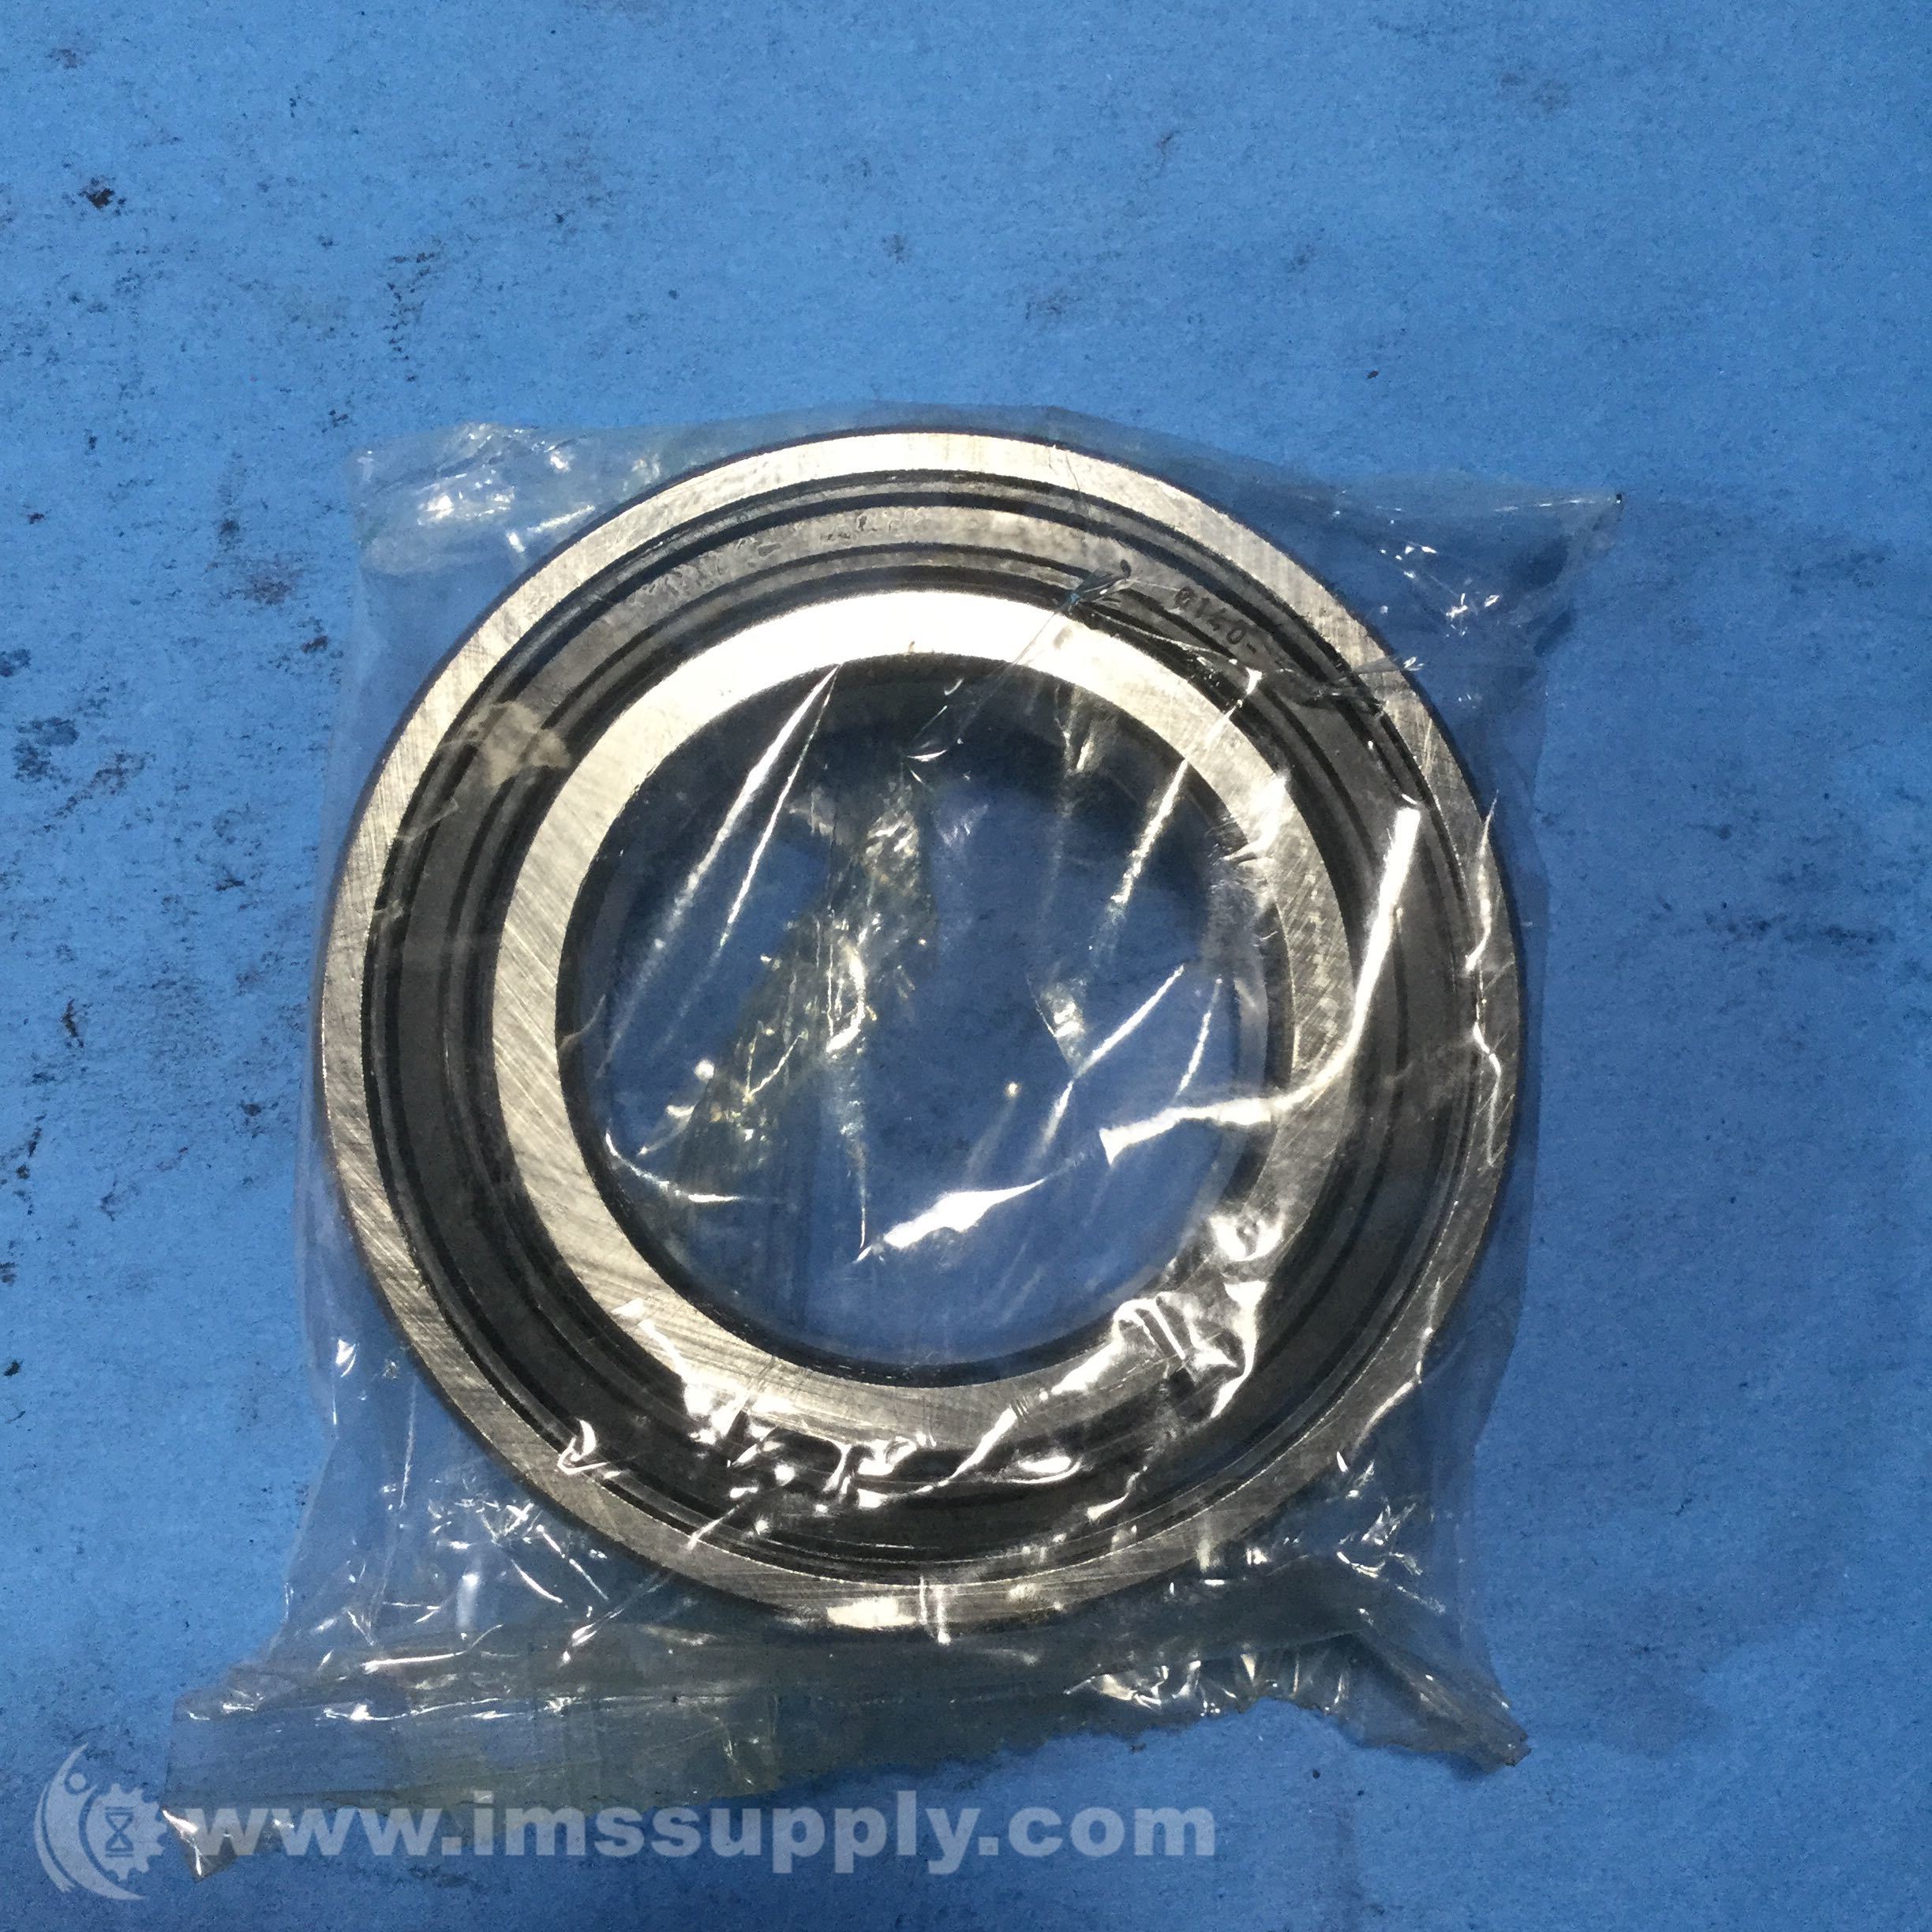 OF20 Double Sealed SKF 6007 2RS JEM Deep Groove Ball Bearing NEW SEALED BOX